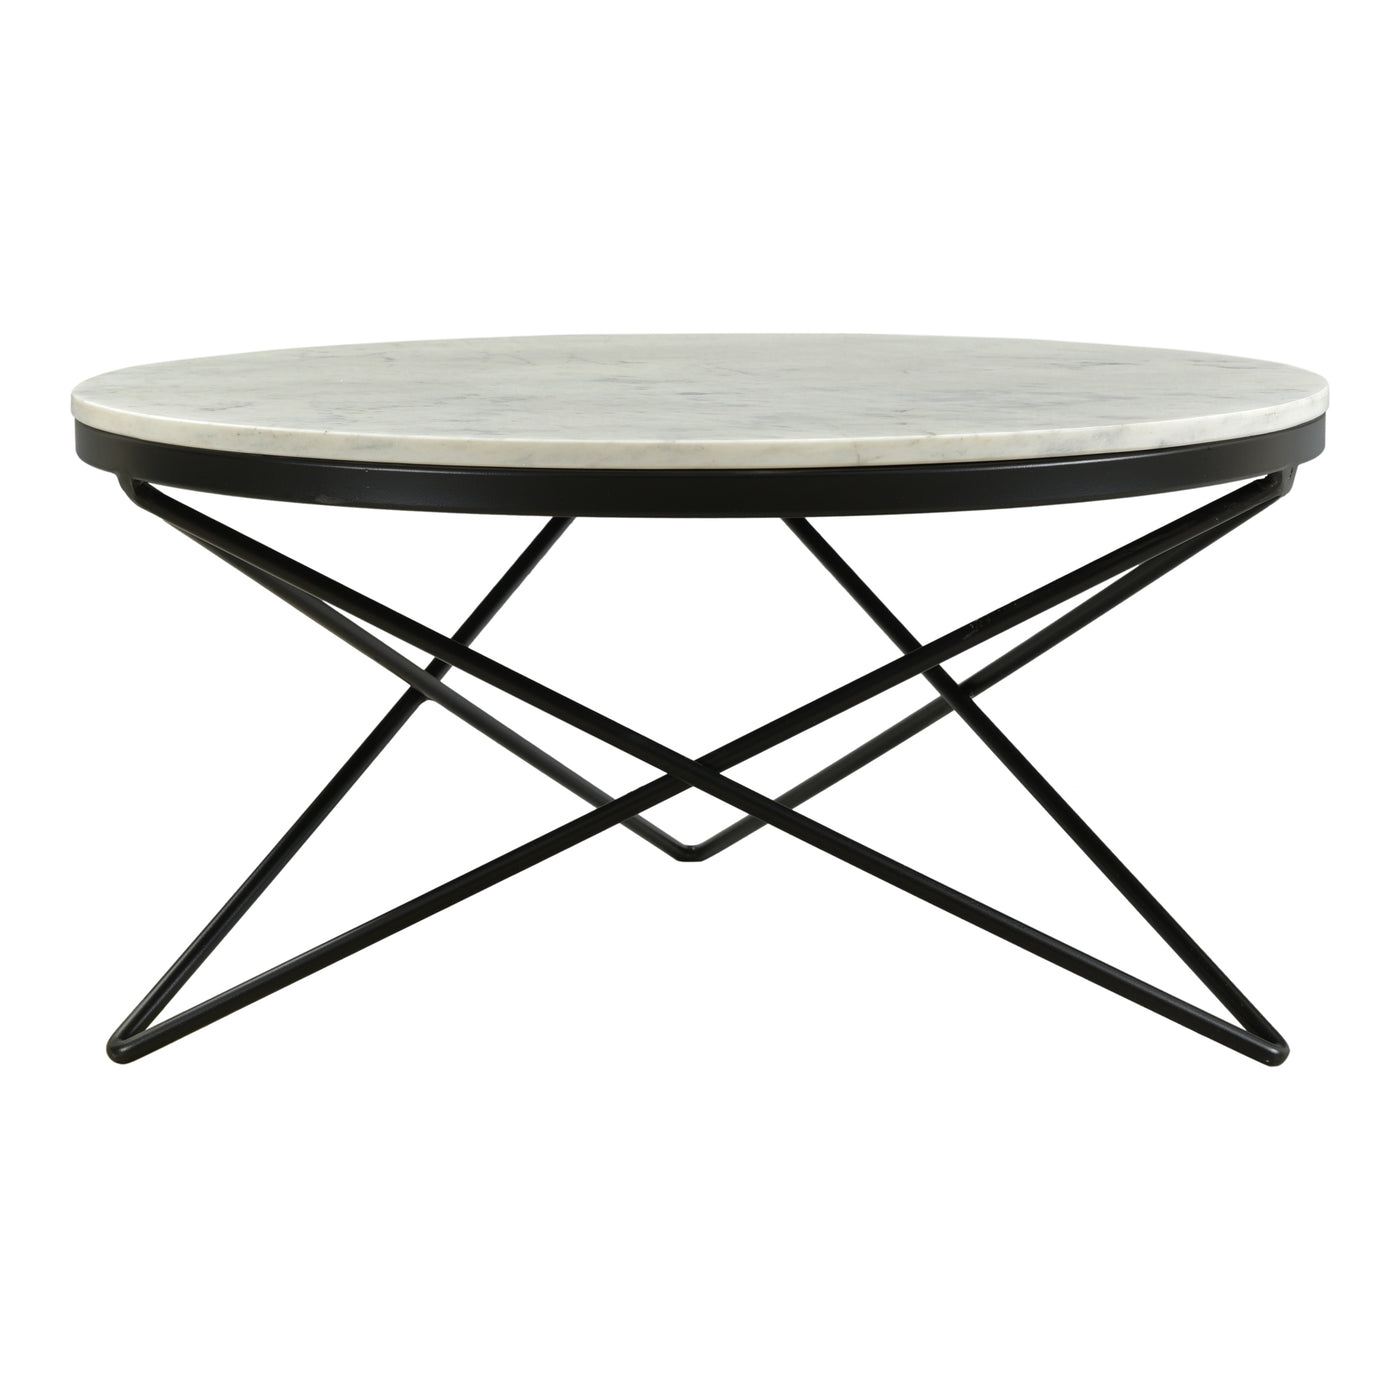 The best pairing since the G&T was created. The Haley Coffee Table's white marble tabletop and black hairpin combine to ma...